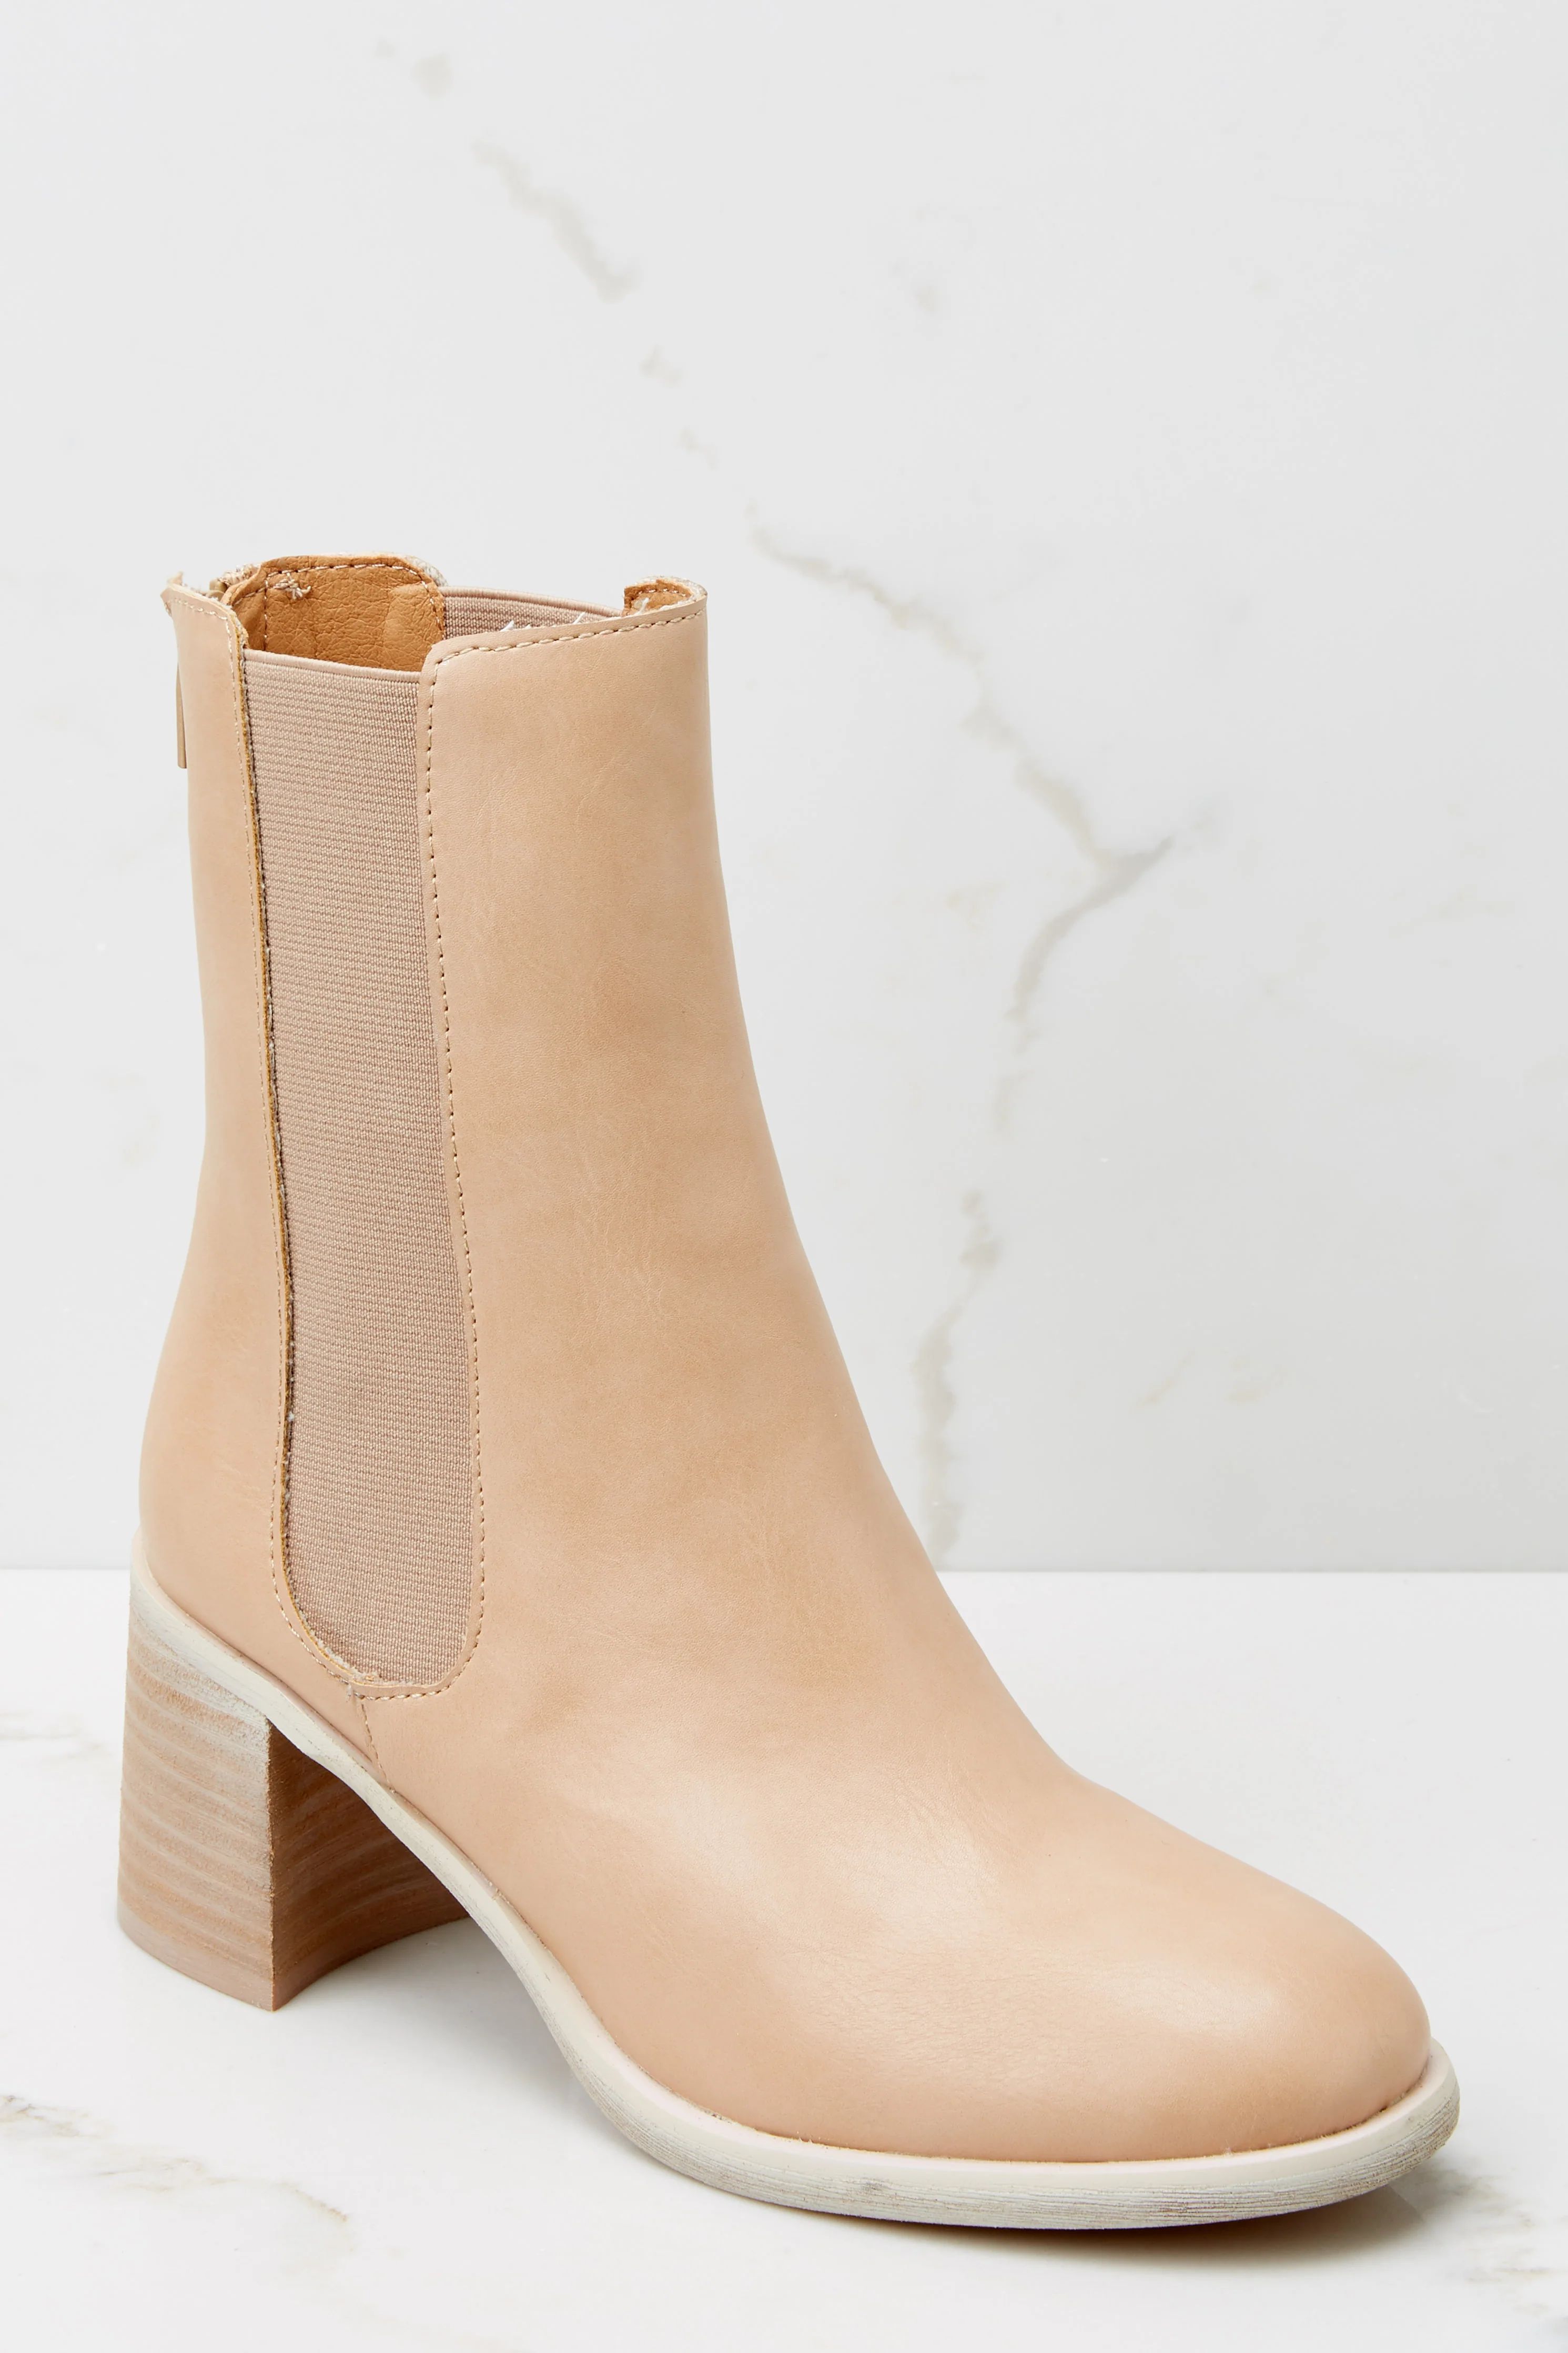 Fierce Step Nude Ankle Booties | Red Dress 